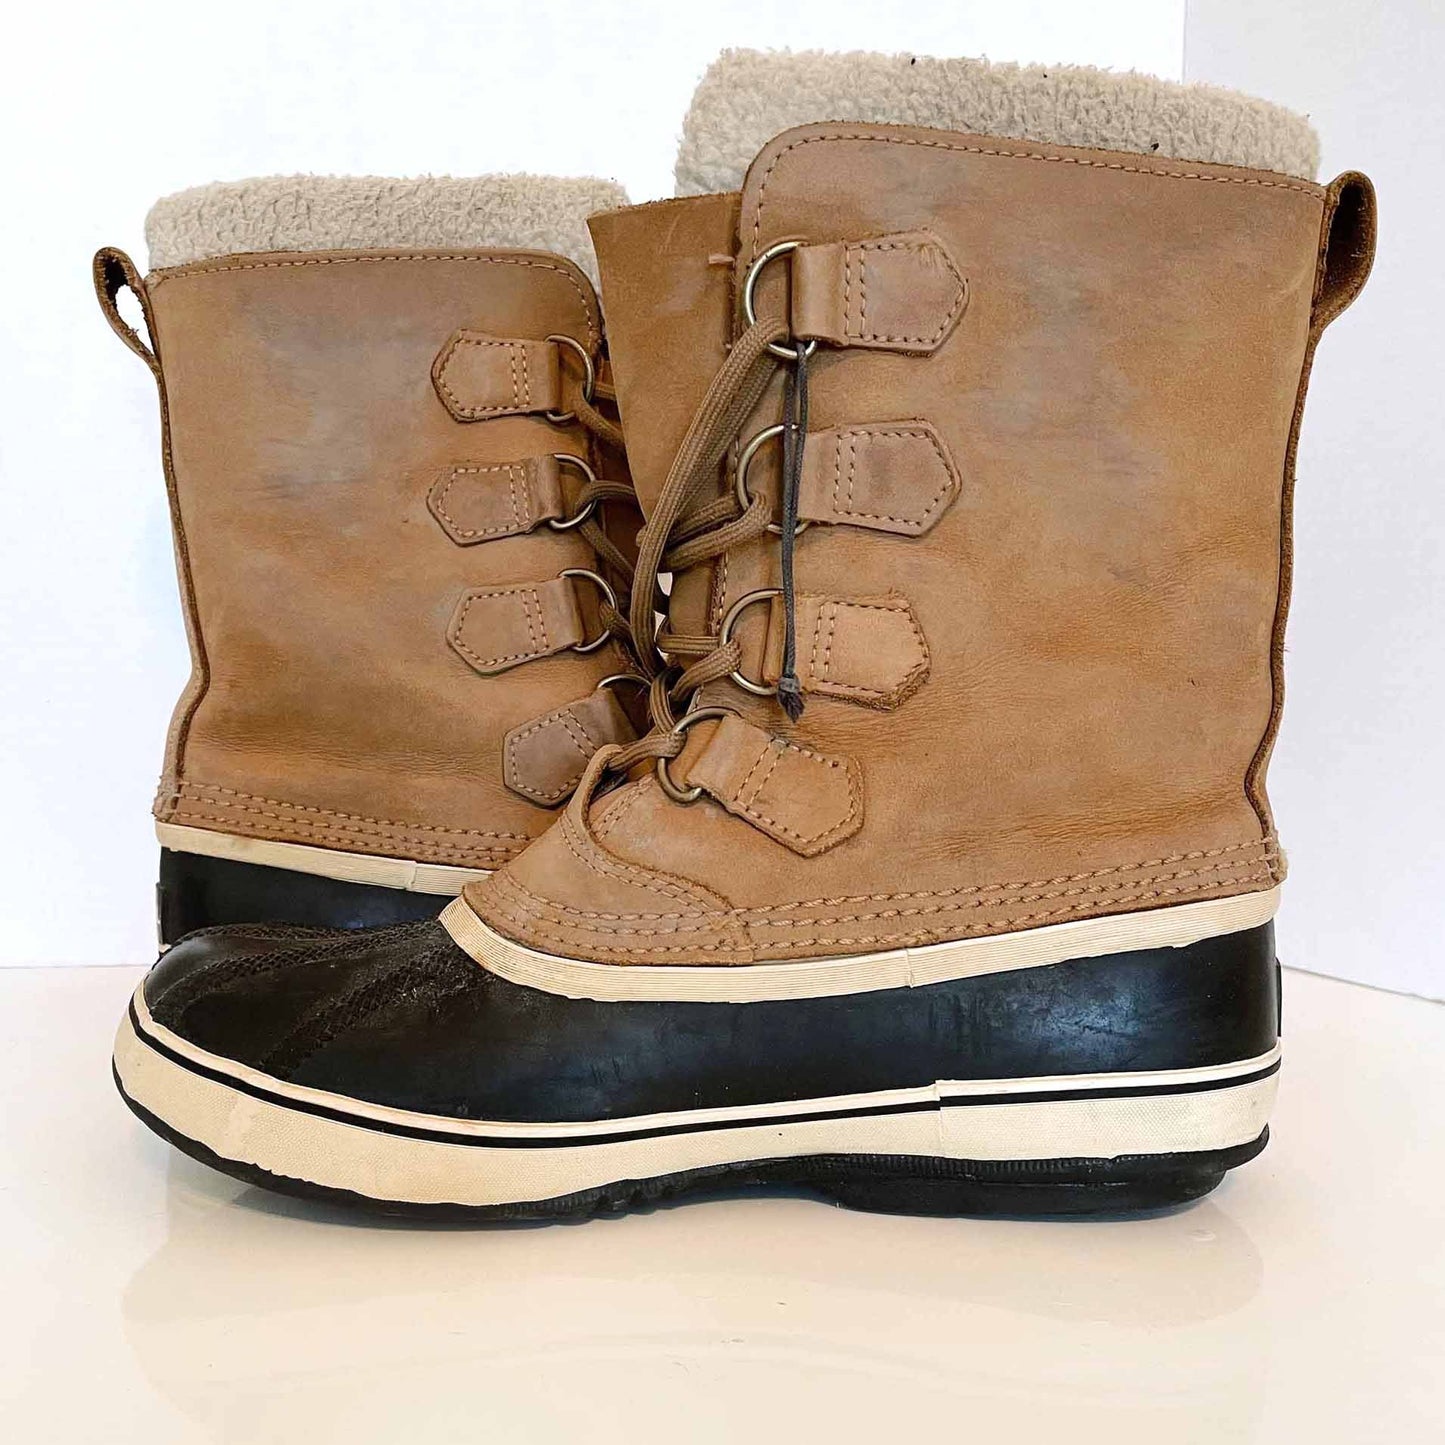 sorel 1964 pac waterproof leather snow boot - size 9.5 W